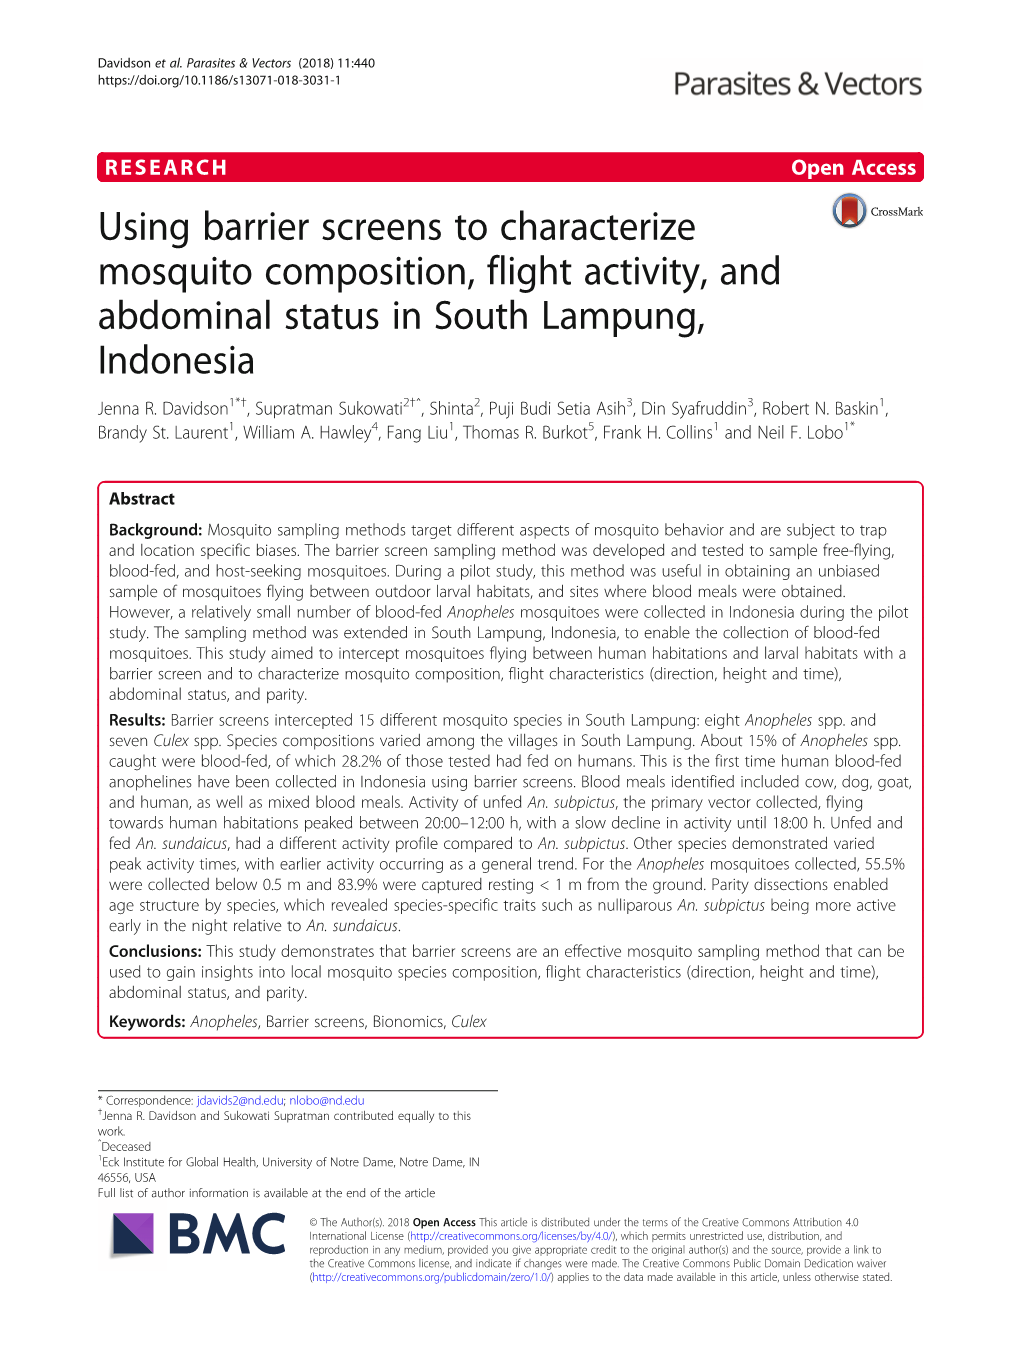 Using Barrier Screens to Characterize Mosquito Composition, Flight Activity, and Abdominal Status in South Lampung, Indonesia Jenna R